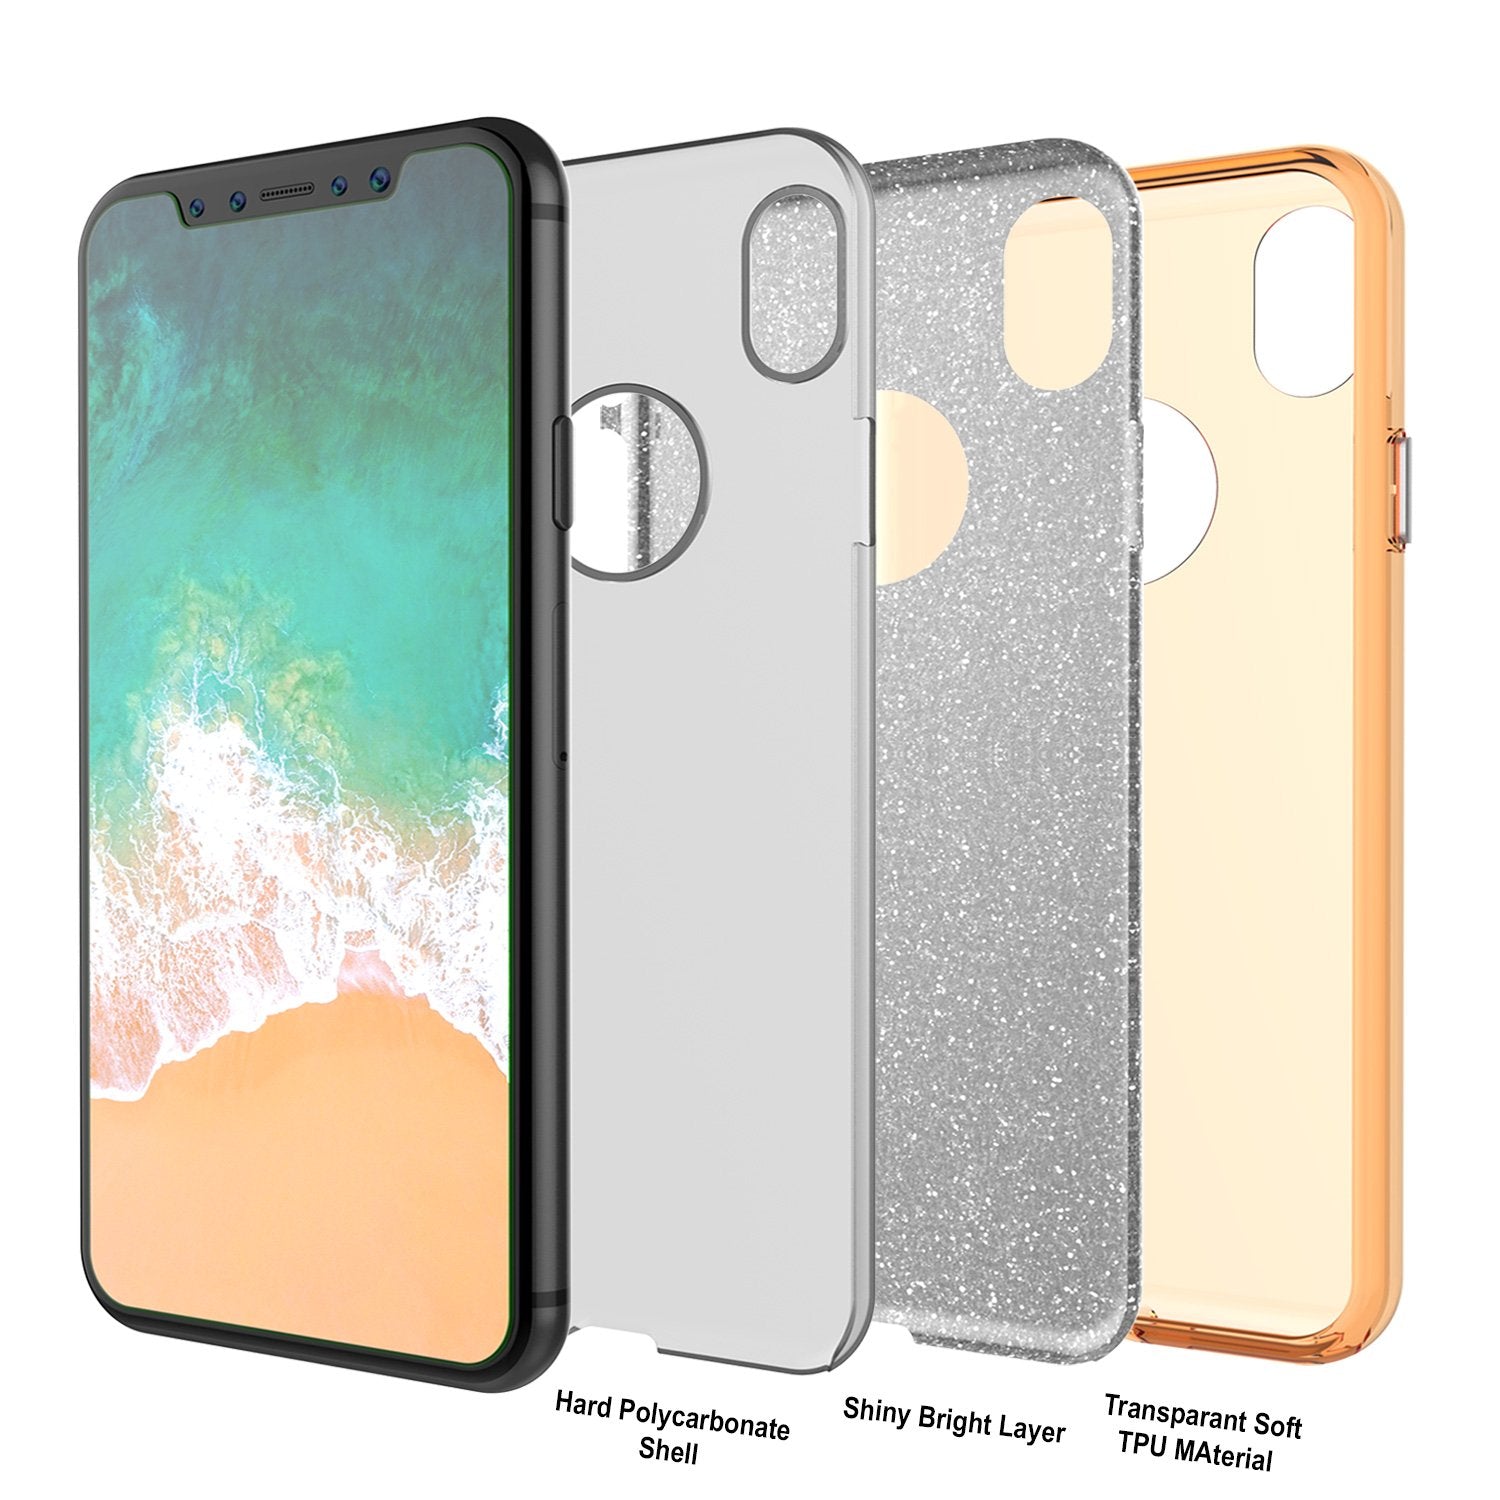 iPhone X Case, Punkcase Galactic 2.0 Series Ultra Slim w/ Tempered Glass Screen Protector | [Gold]